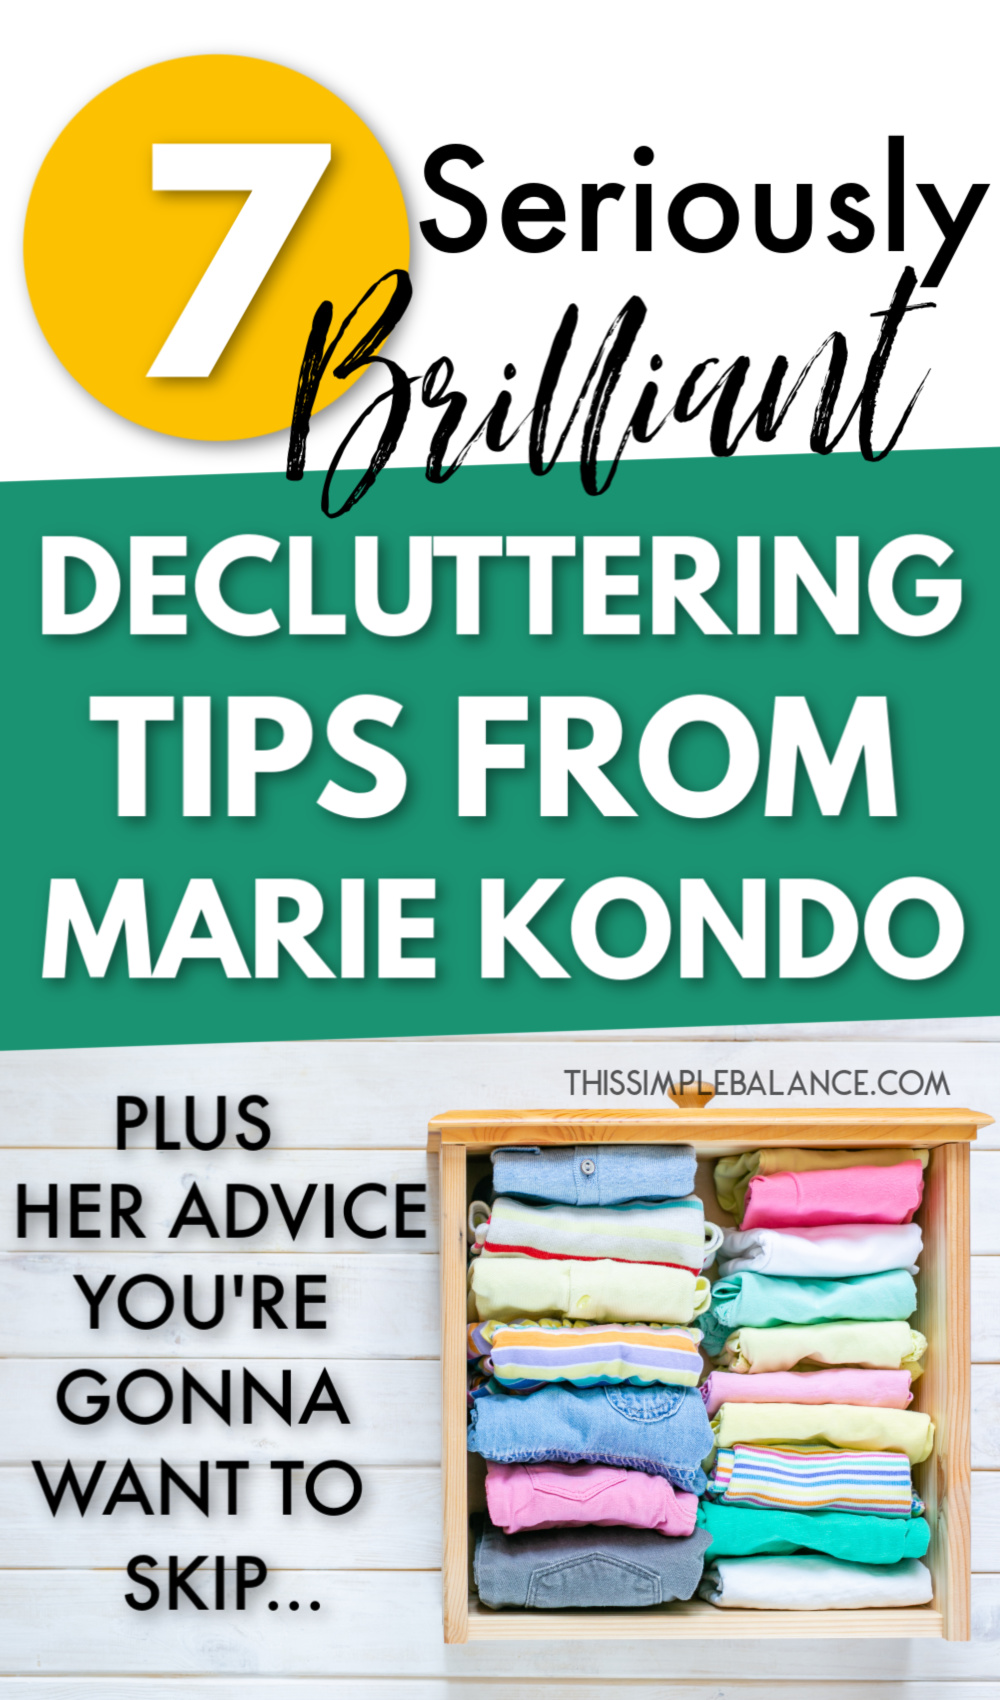 drawer with clothes folded using the KonMari folding method, with text overlay, "7 seriously brilliant decluttering tips from marie kondo plus her advice you're gonna want to skip..."